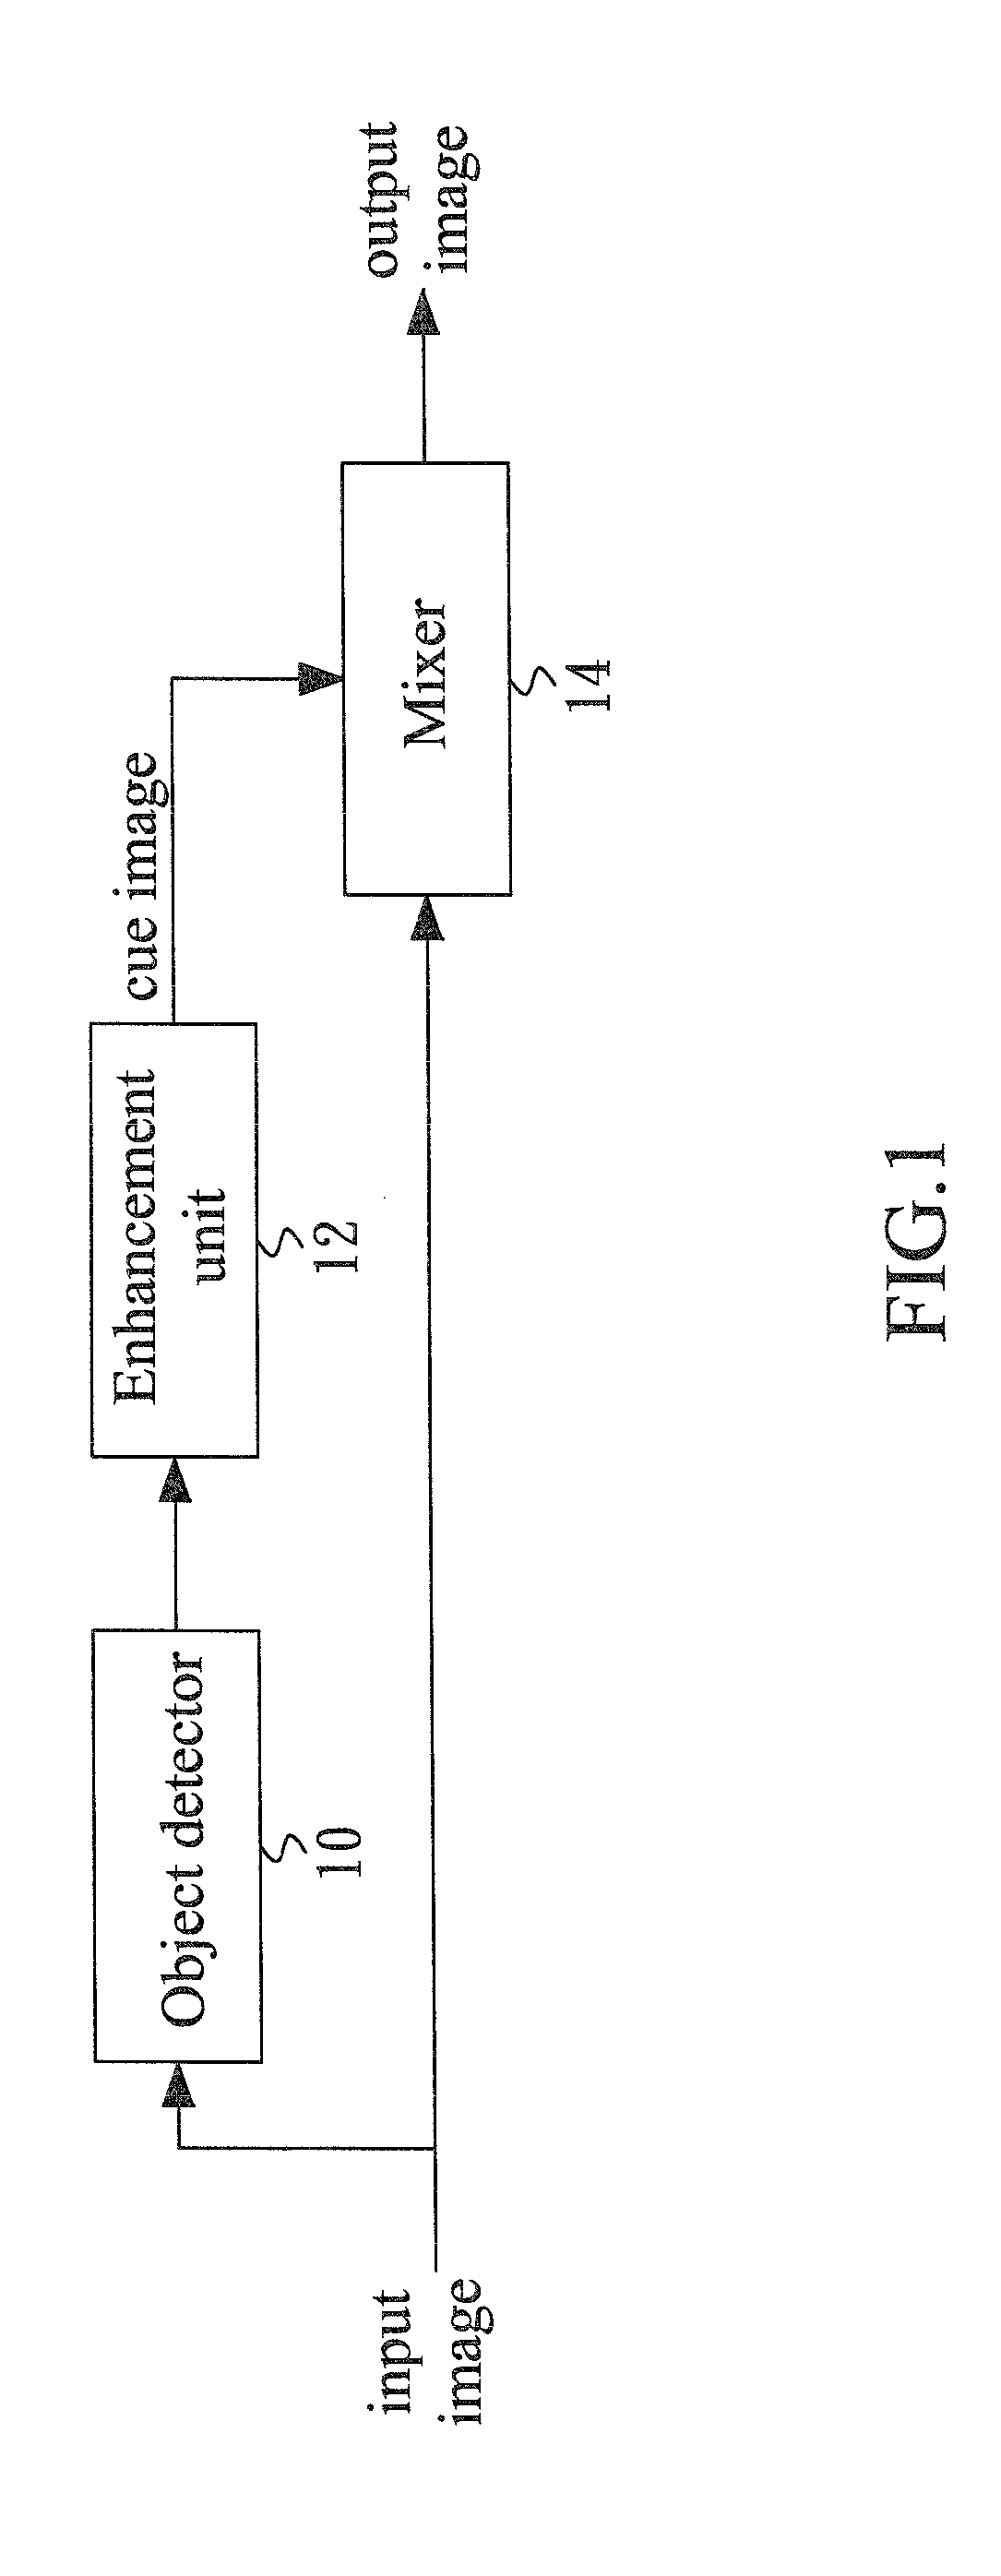 Object-based system and method of directing visual attention by a subliminal cue